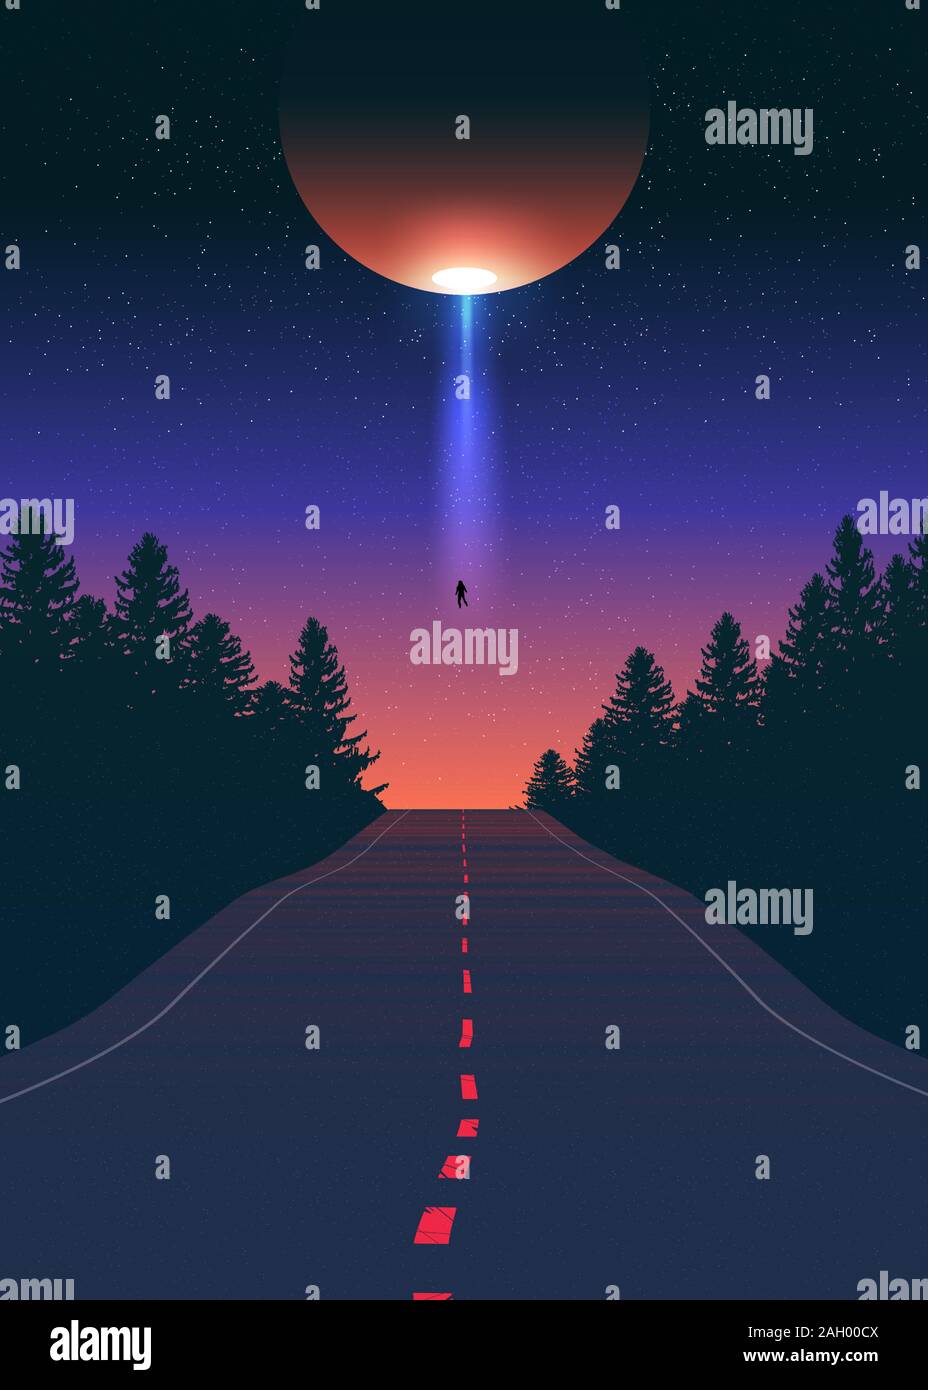 An imagery illustration of the alien ship abducting one man from the road during night time. Stock Vector